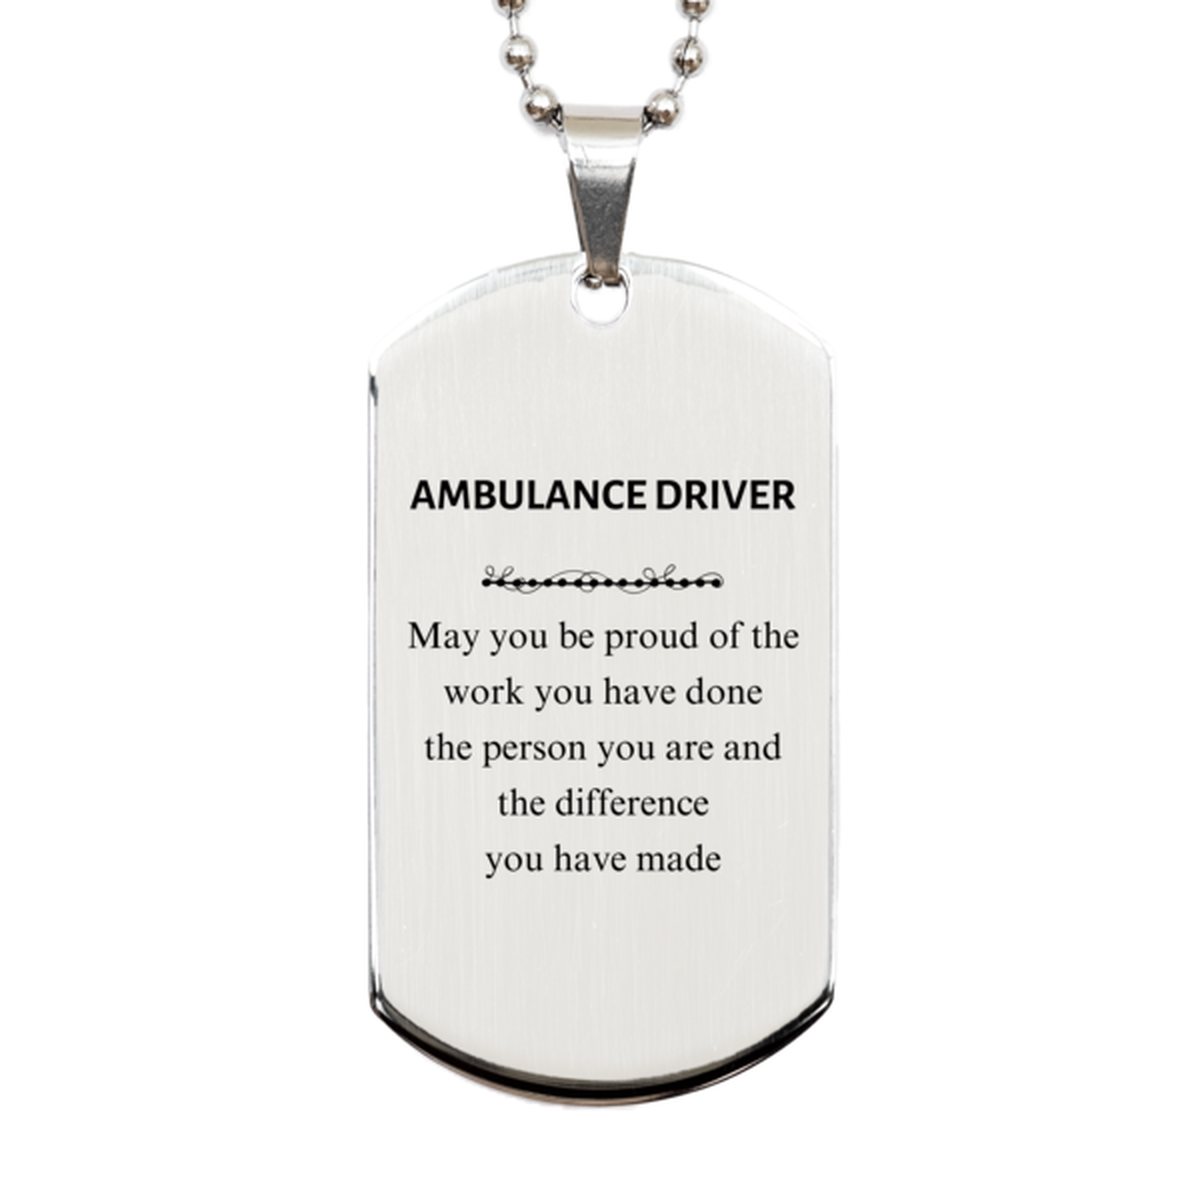 Ambulance Driver May you be proud of the work you have done, Retirement Ambulance Driver Silver Dog Tag for Colleague Appreciation Gifts Amazing for Ambulance Driver